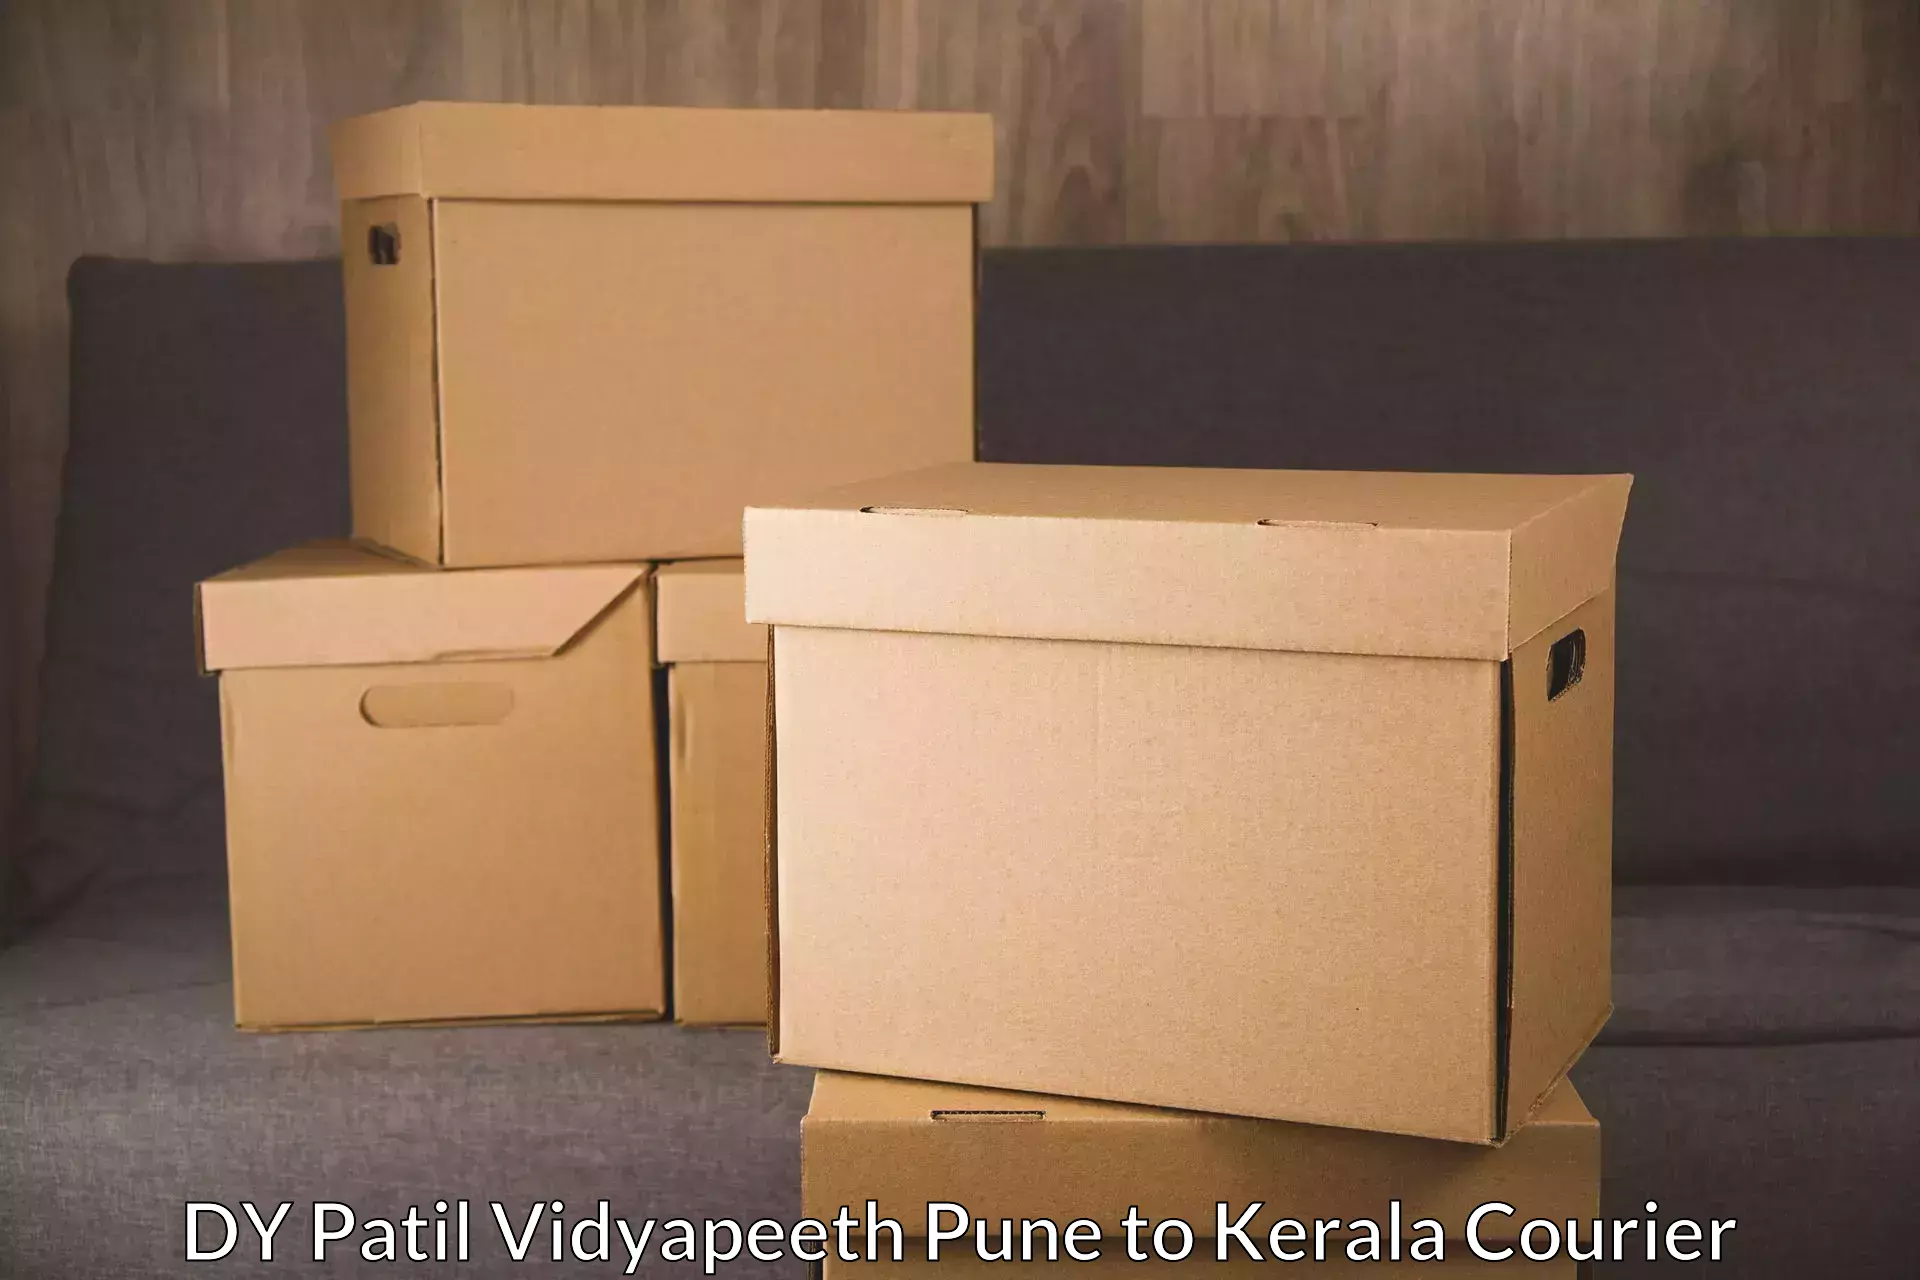 Parcel delivery DY Patil Vidyapeeth Pune to Kerala